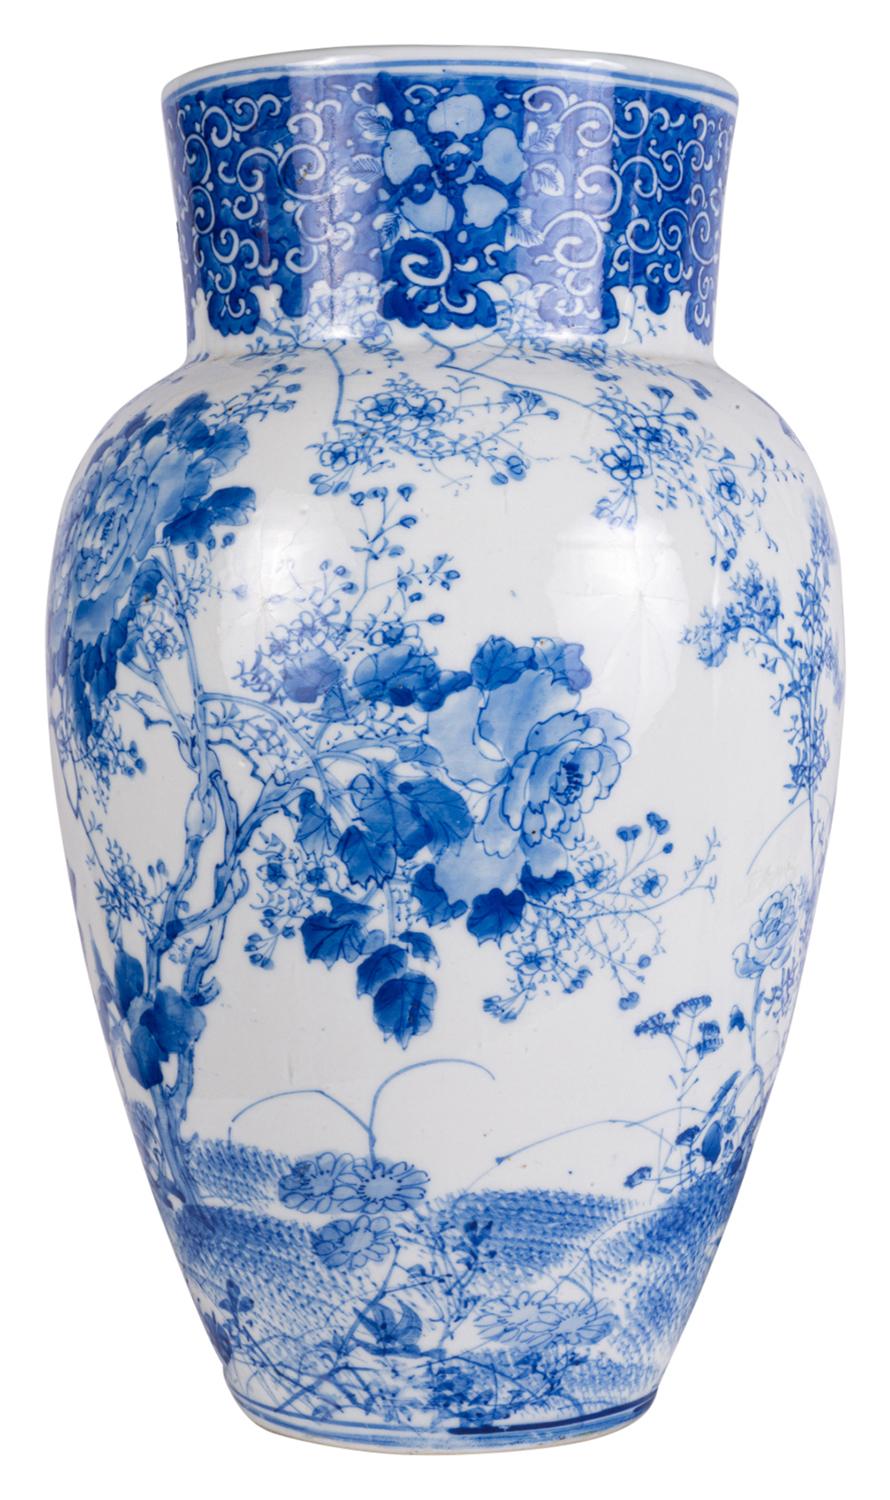 A fine quality pair of Japanese, Meiji period (1868-1912) blue and white vases, each with wonderful scenes of exotic birds in blossom trees.